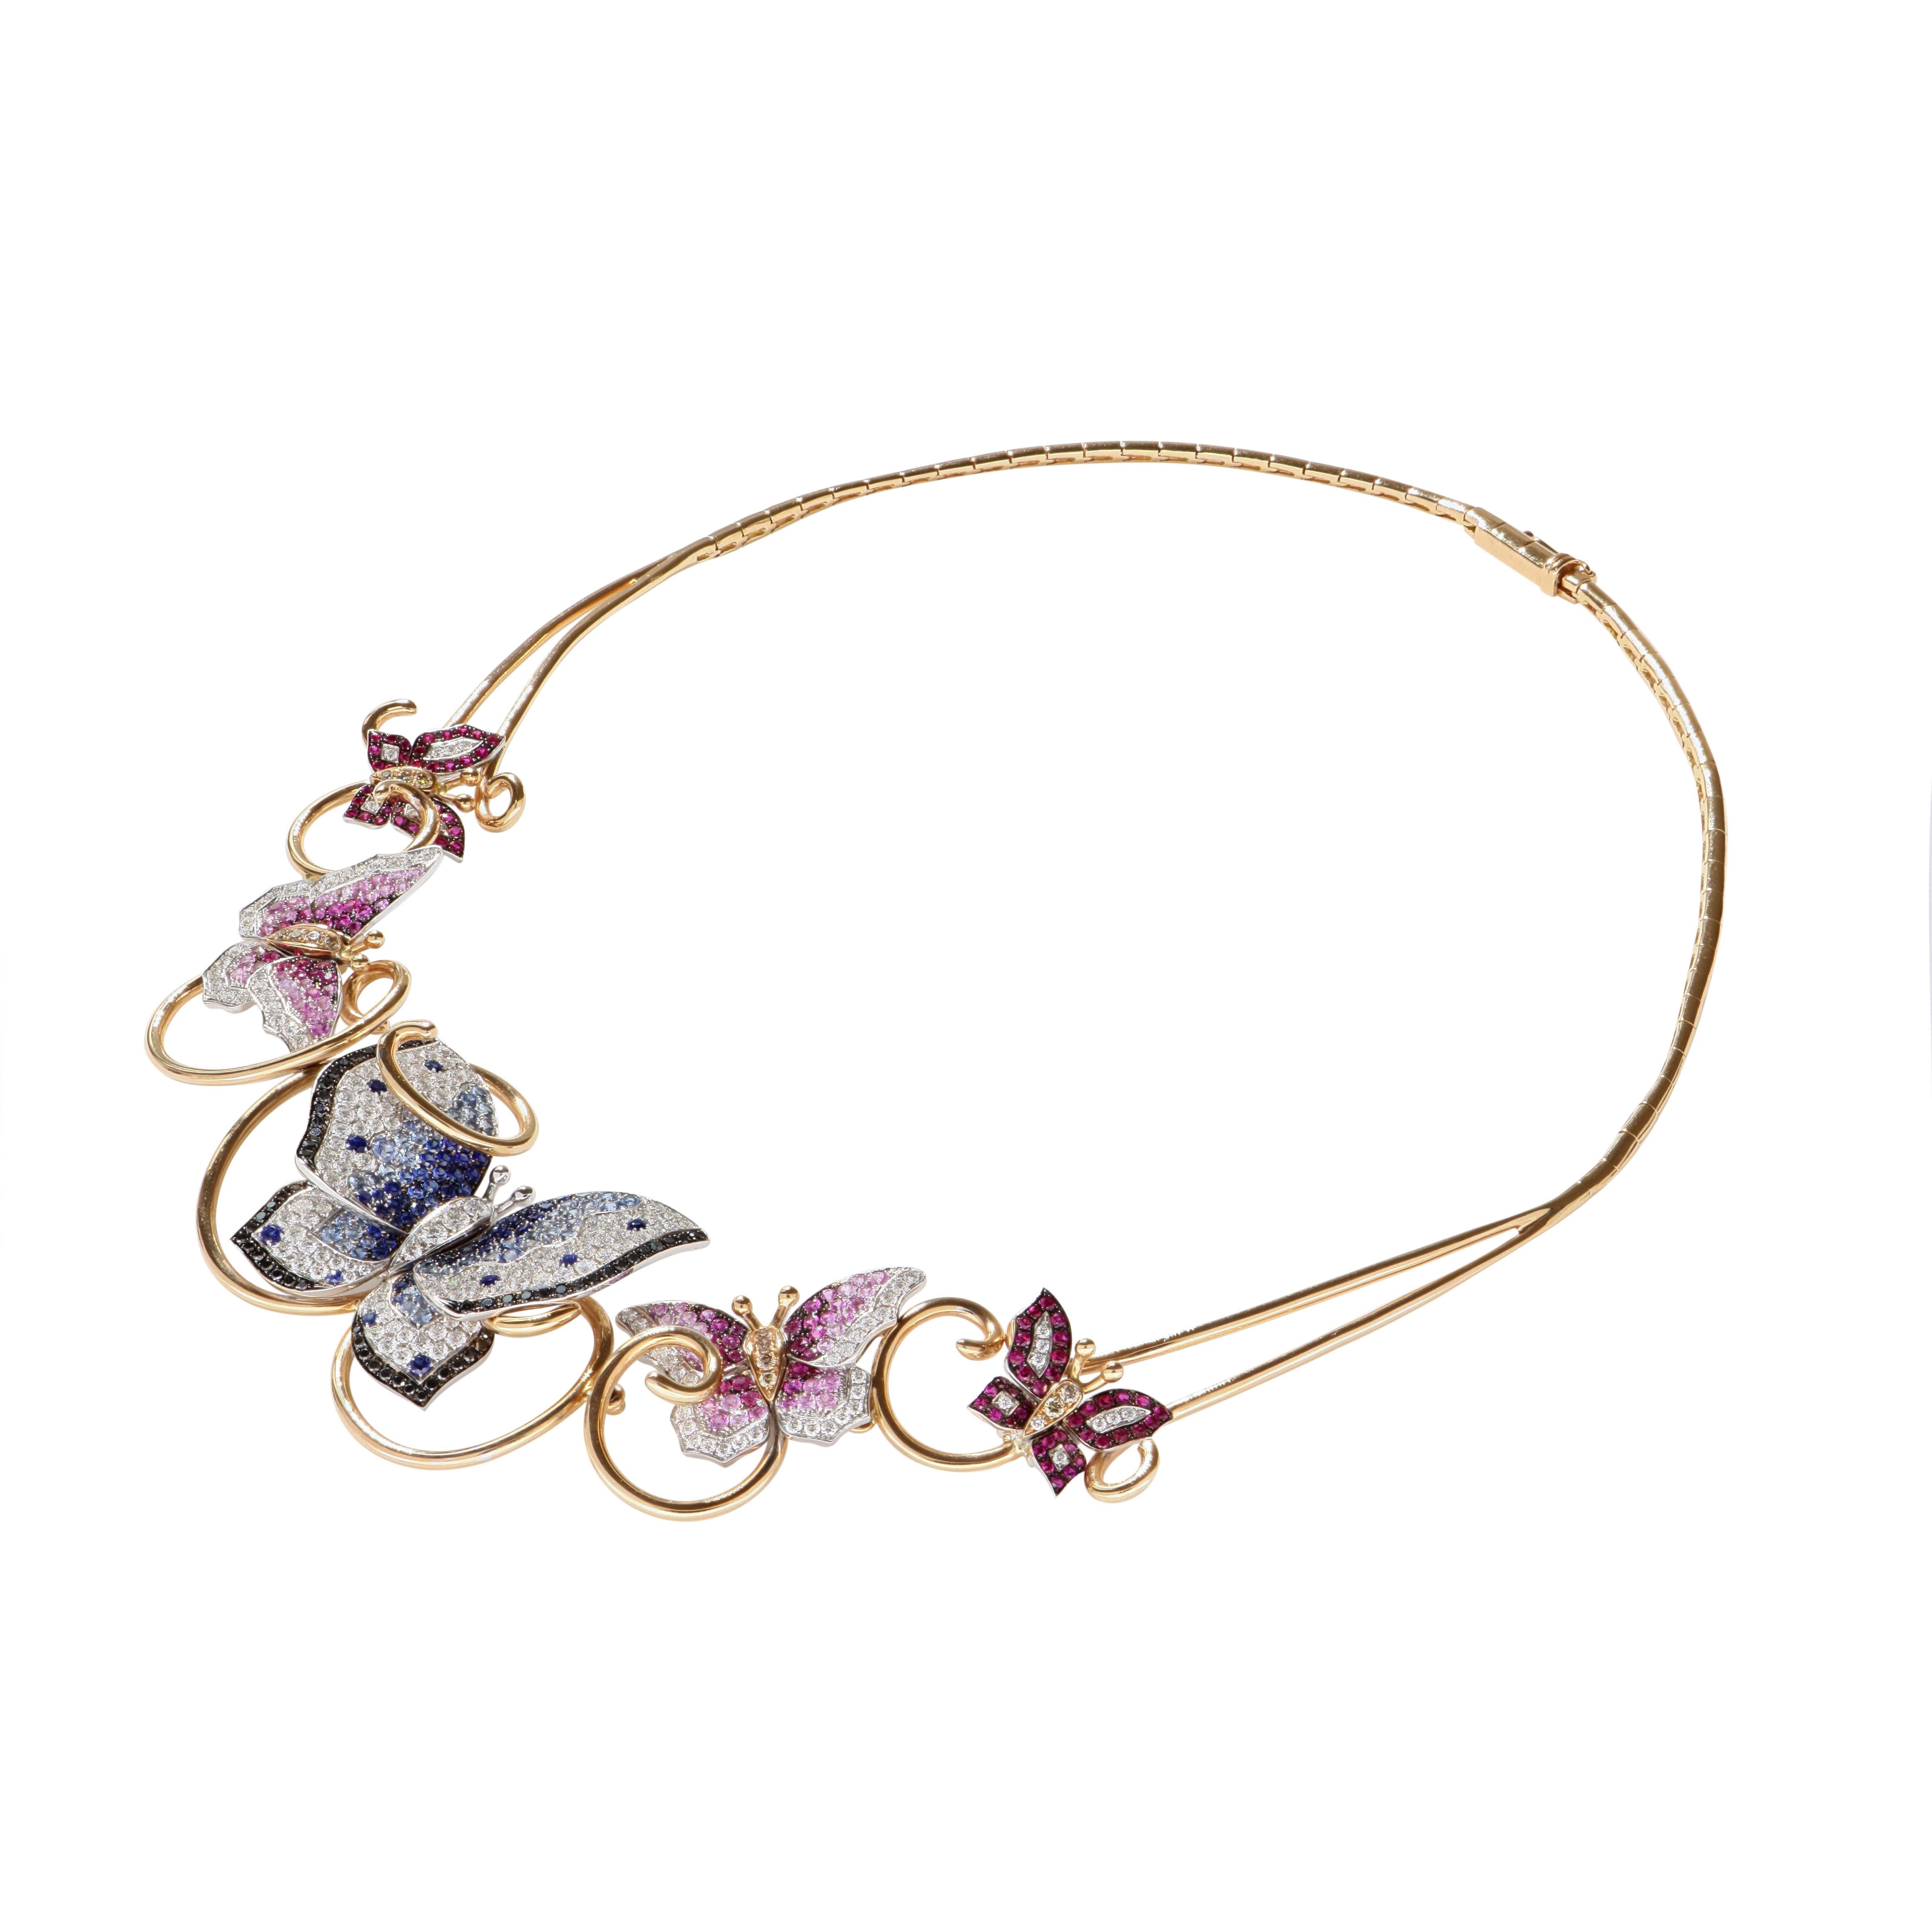 Crafted in 18 Kt yellow gold, this beautiful necklace features 5 glistering butterflies, all covered in different-shade rubies, sapphires, and diamonds. Perfect for special occasions, like cocktail parties, weddings, and any events where you want to